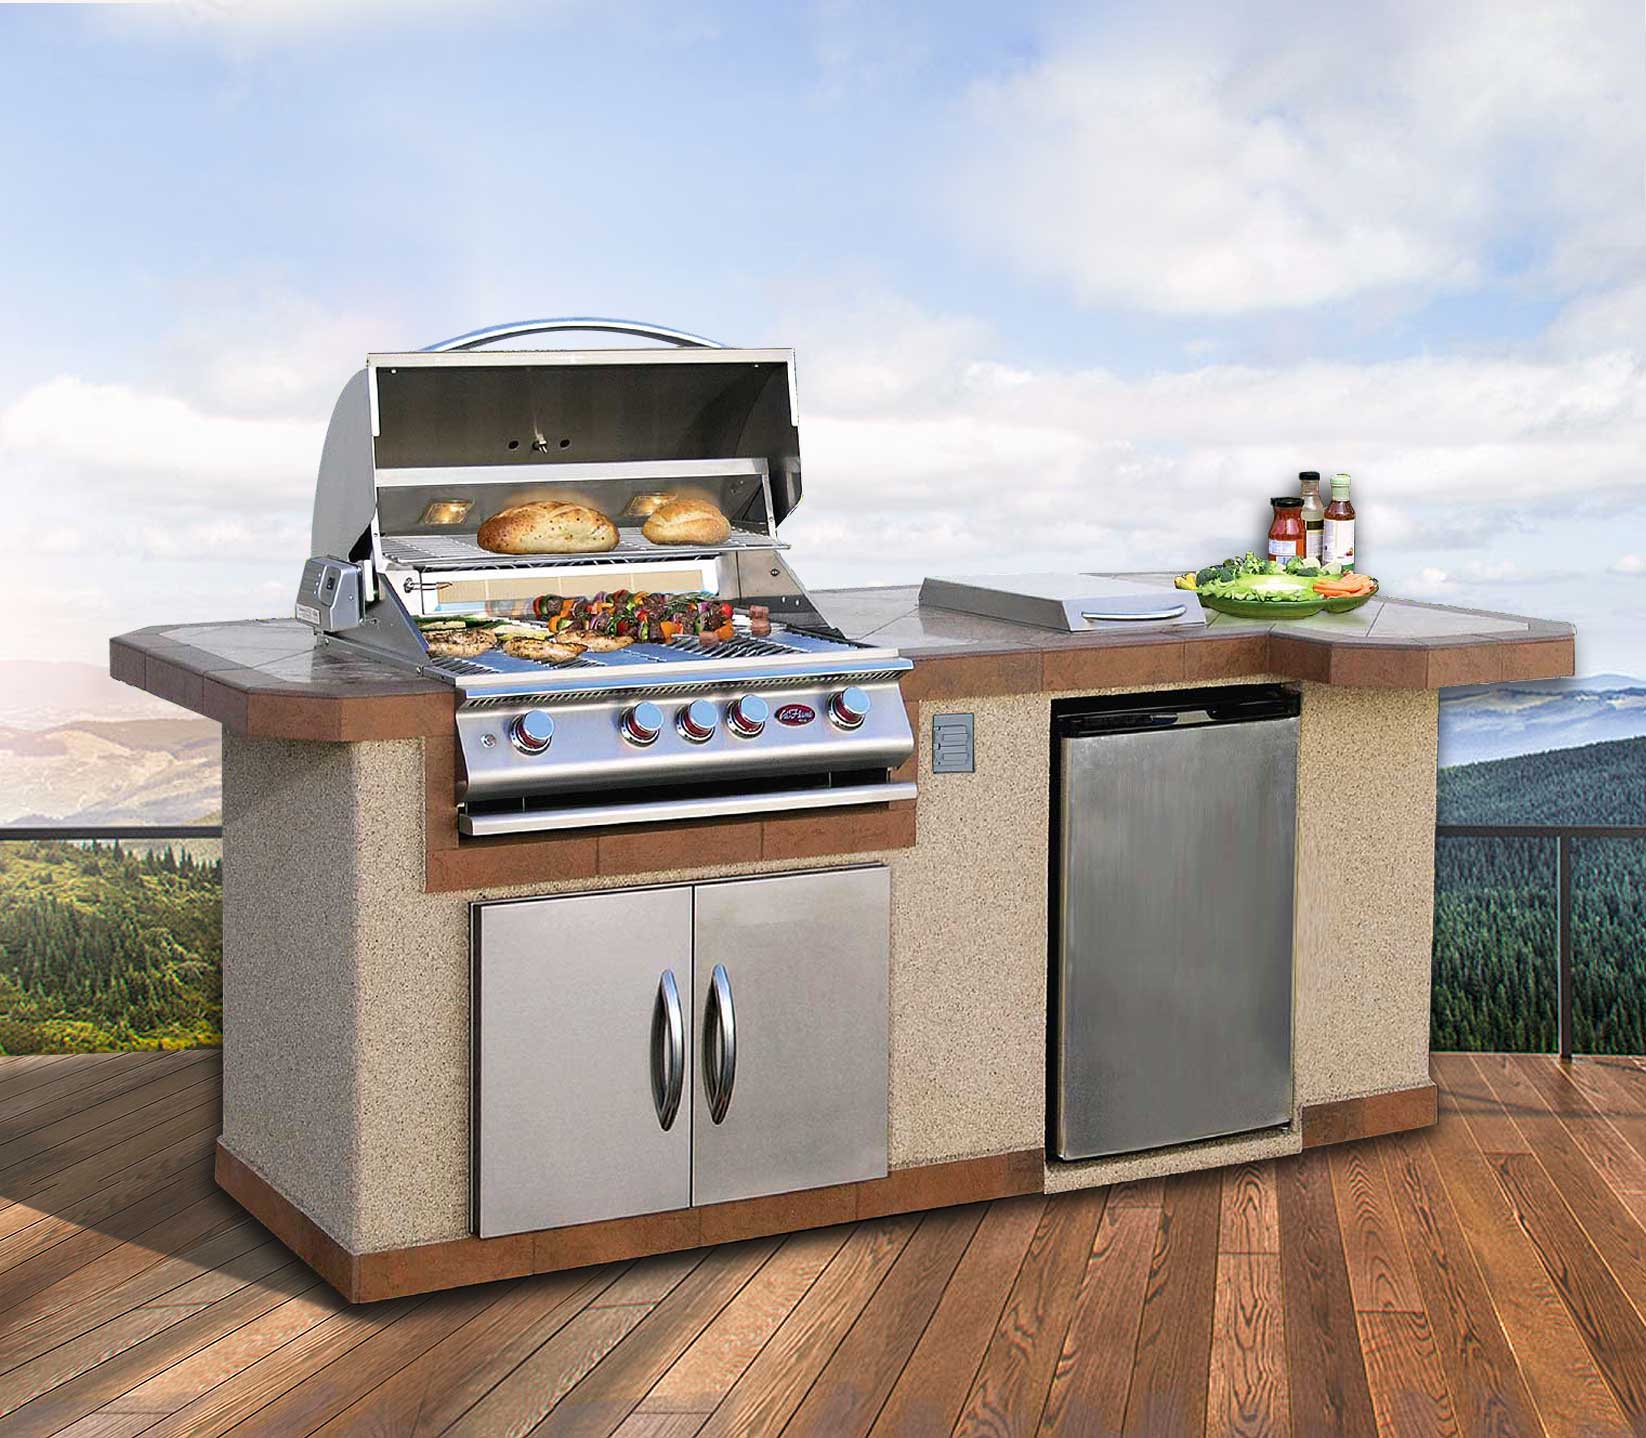 L-Shaped BBQ Island With P4 Grill And Refrigerator By Cal Flame LBK820 ...